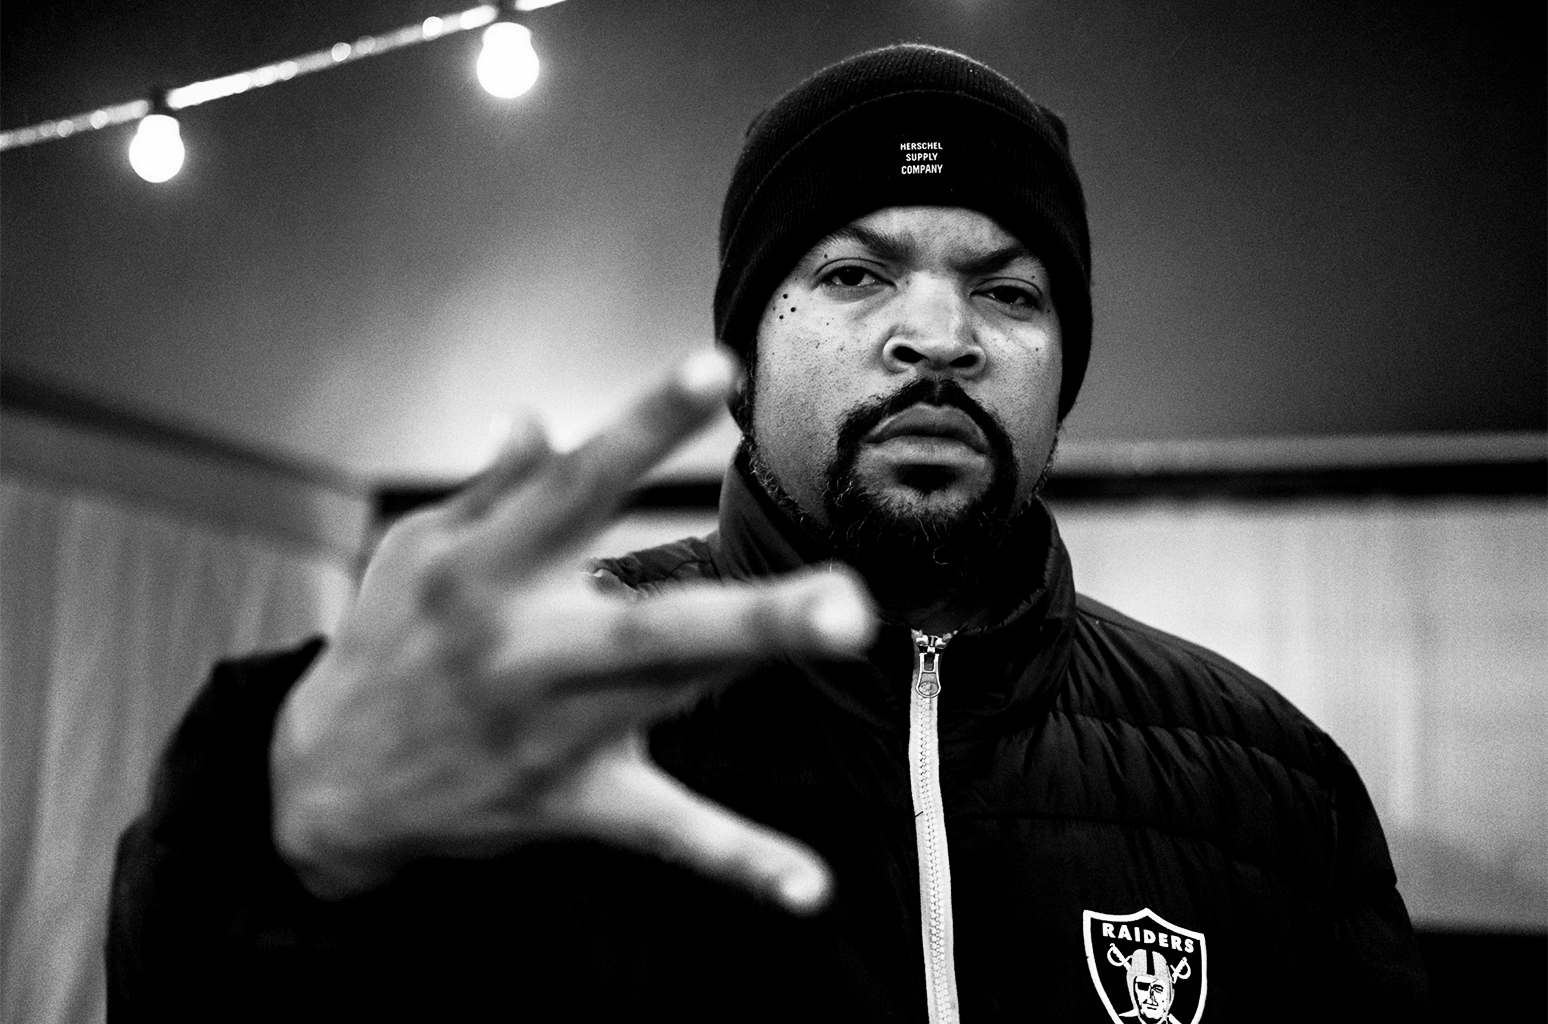 Ice Cube Backgrounds on Wallpapers Vista